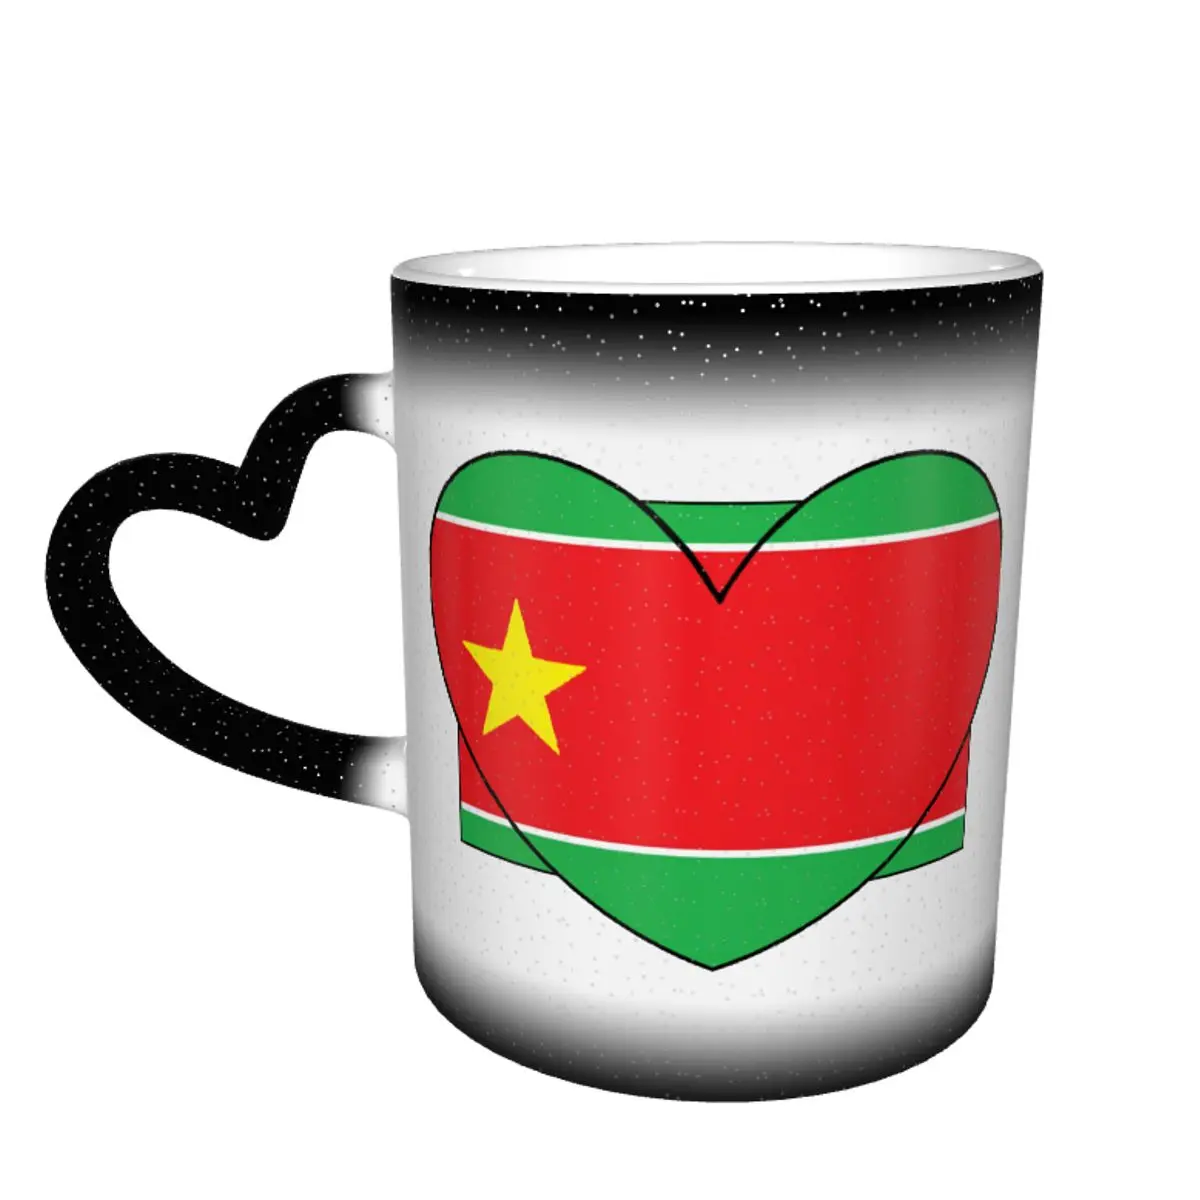 

Color Changing Mug in the Sky I Love Guadeloupe Classic Funny R276 Ceramic Heat-sensitive Cup Funny Novelty Coffee cups